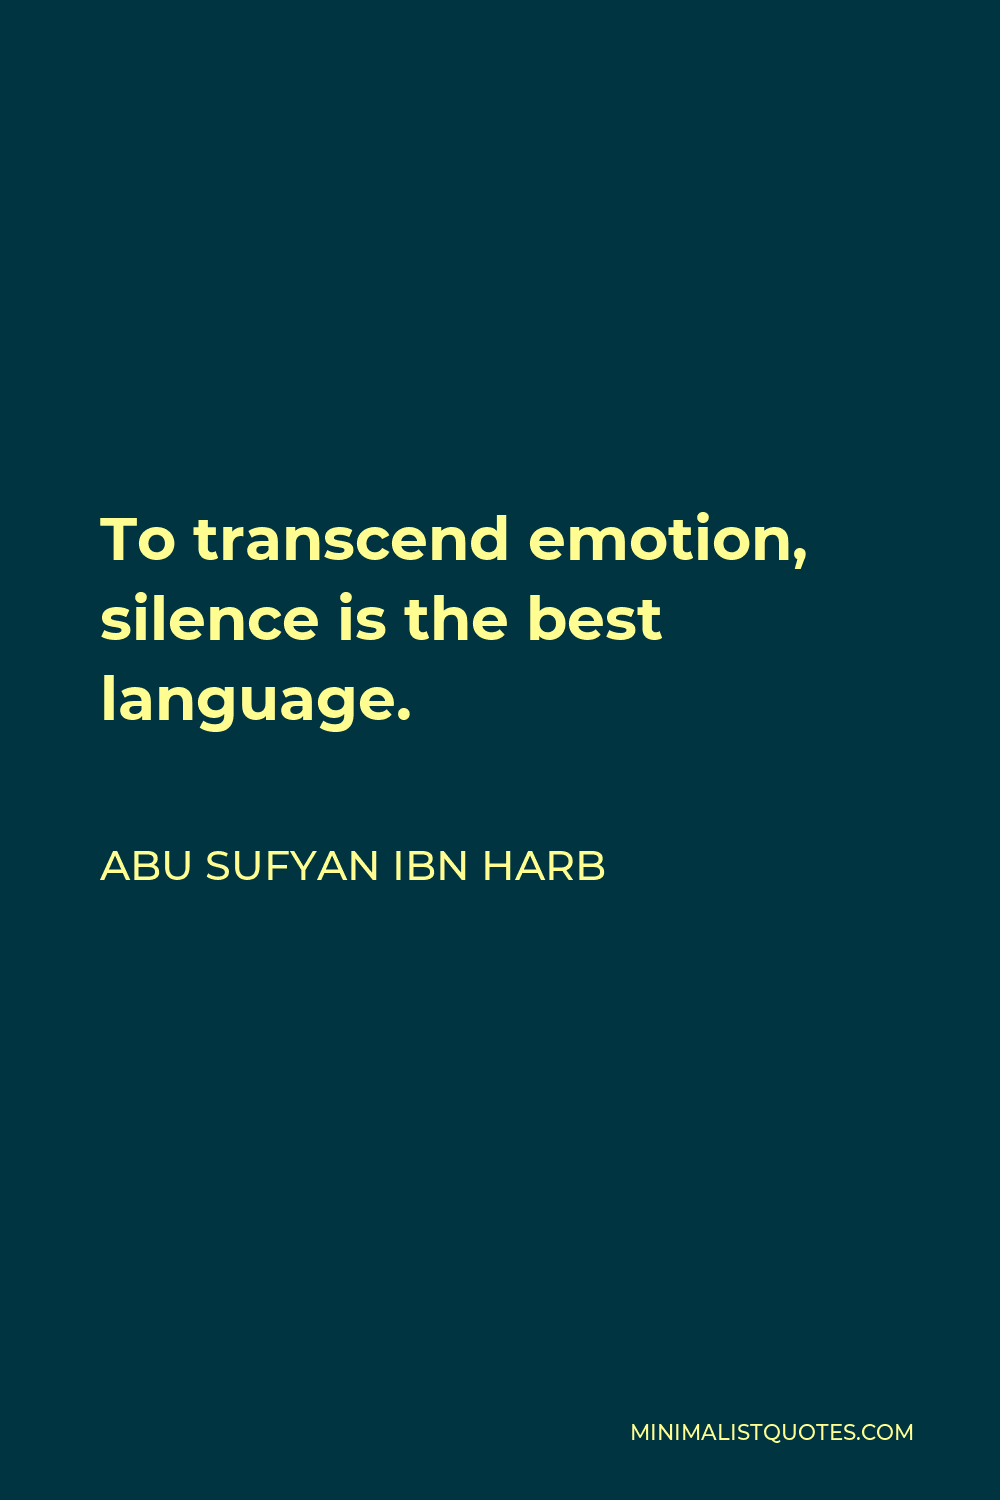 Abu Sufyan ibn Harb Quote - To transcend emotion, silence is the best language.